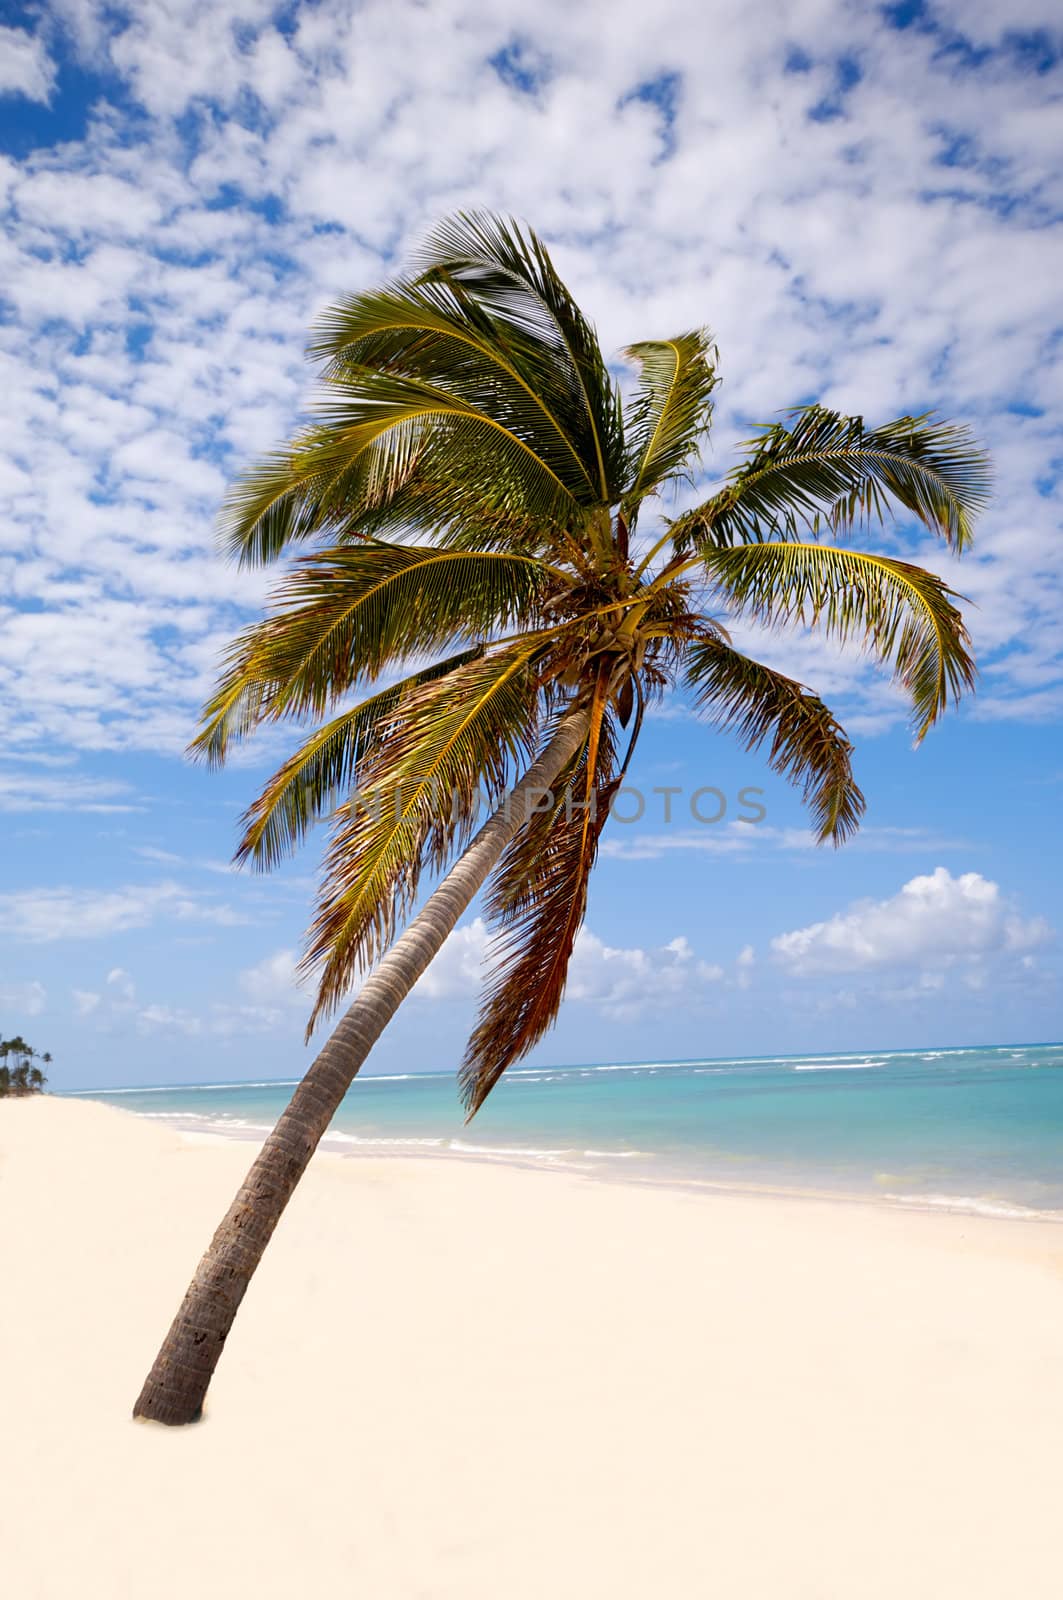 Palm hanging over exotic caribbean beach with the coast in the background.